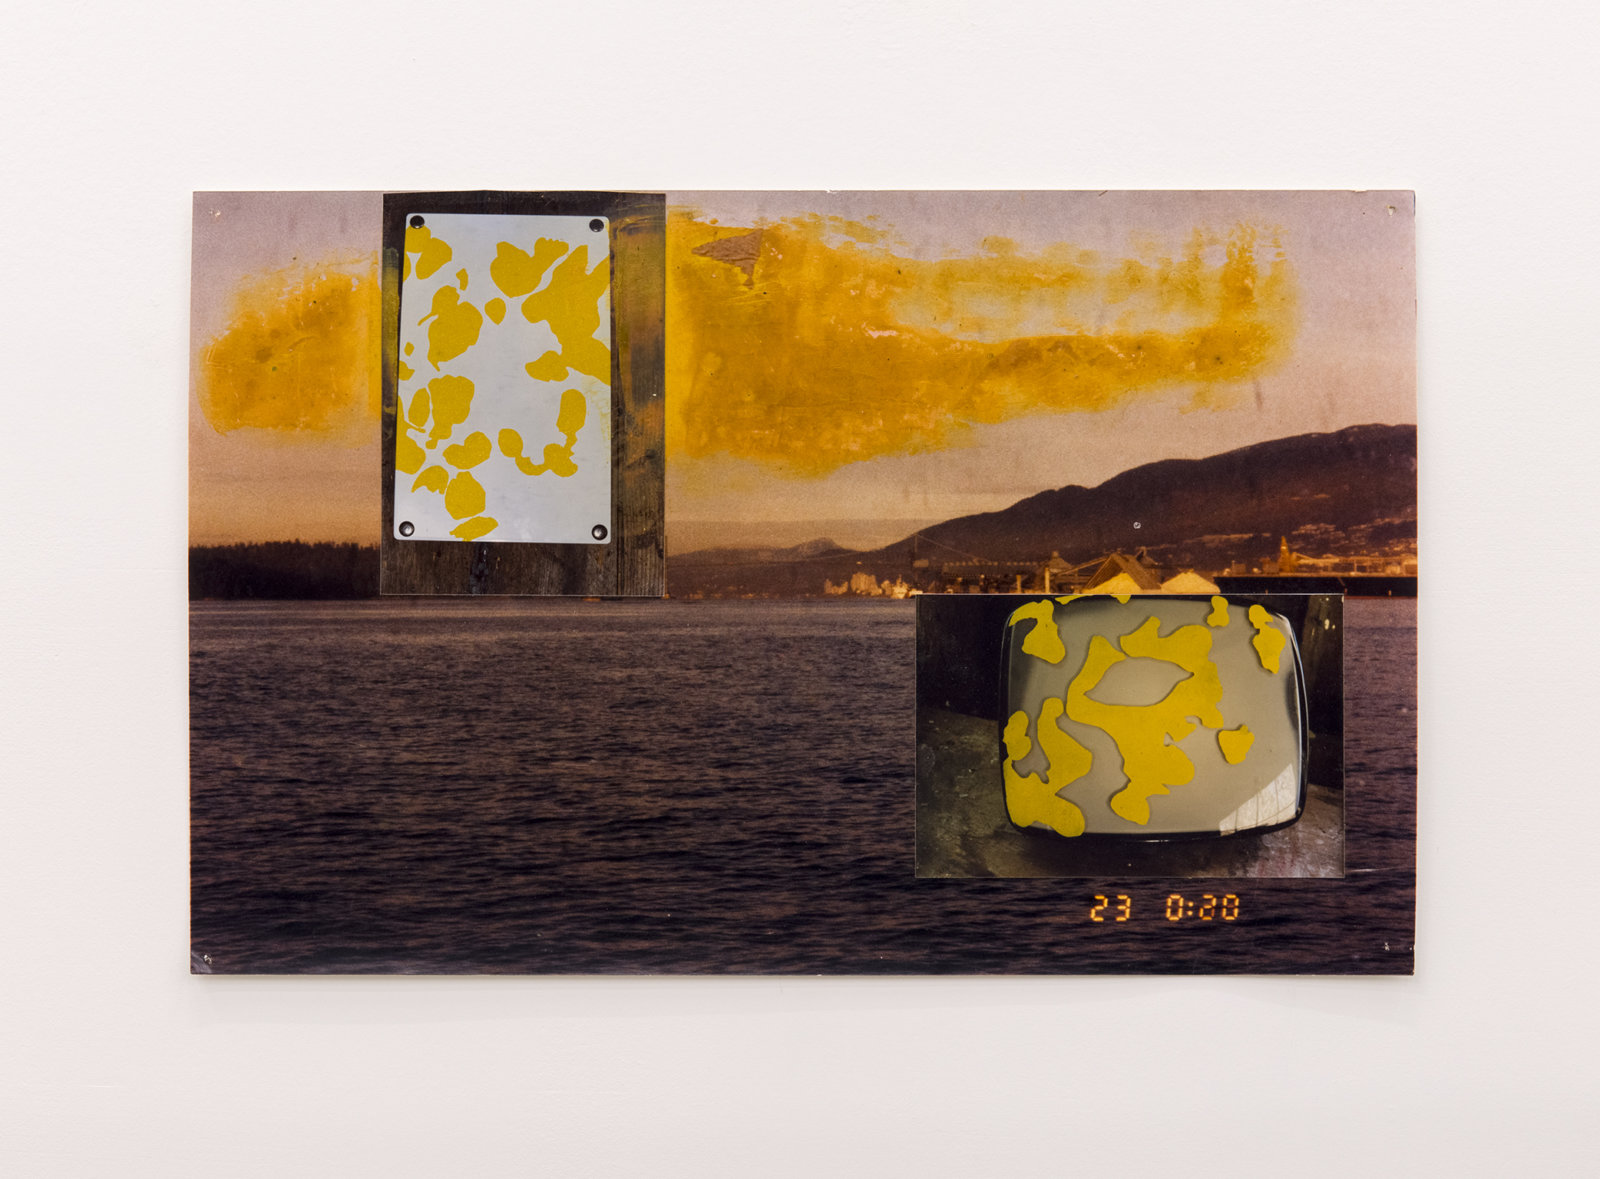 Jerry Pethick, Iceberg Echo and Walnut Leaves, 1993–1994, photo collage and paint, 11 x 17 in. (28 x 43 cm)